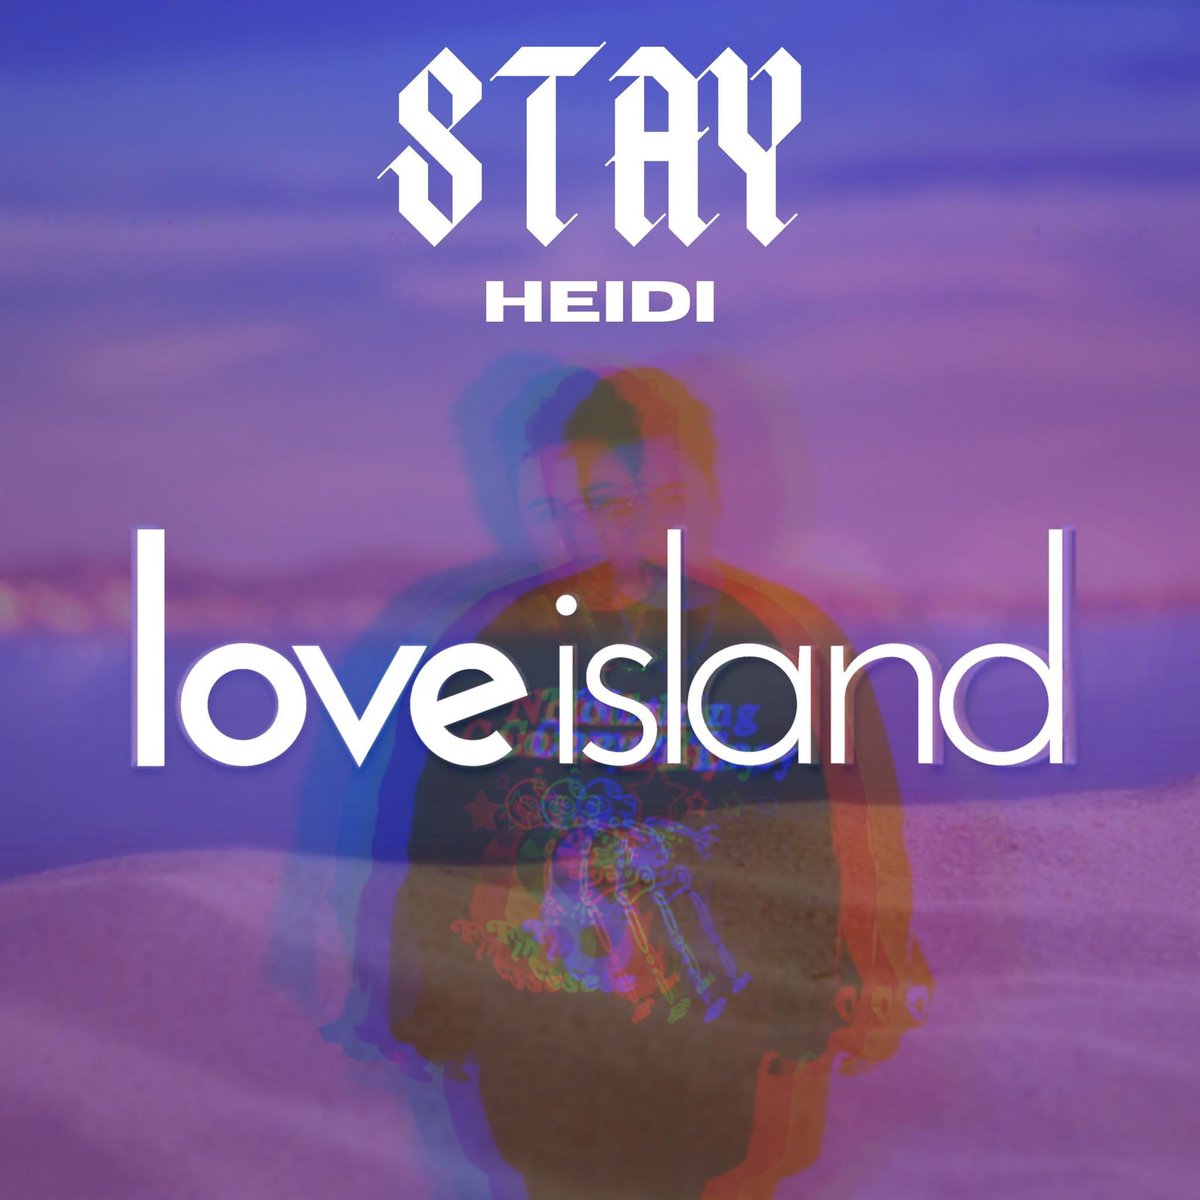 Another fantastic success for one of our ex students, @heidimusicuk has been signed by Universal Music Group and tonight one of her tracks was played on @LoveIsland. Catch her on Spotify and Apple Music, this lady is going places!  open.spotify.com/artist/4R9Gm2D… #proudofourstudents